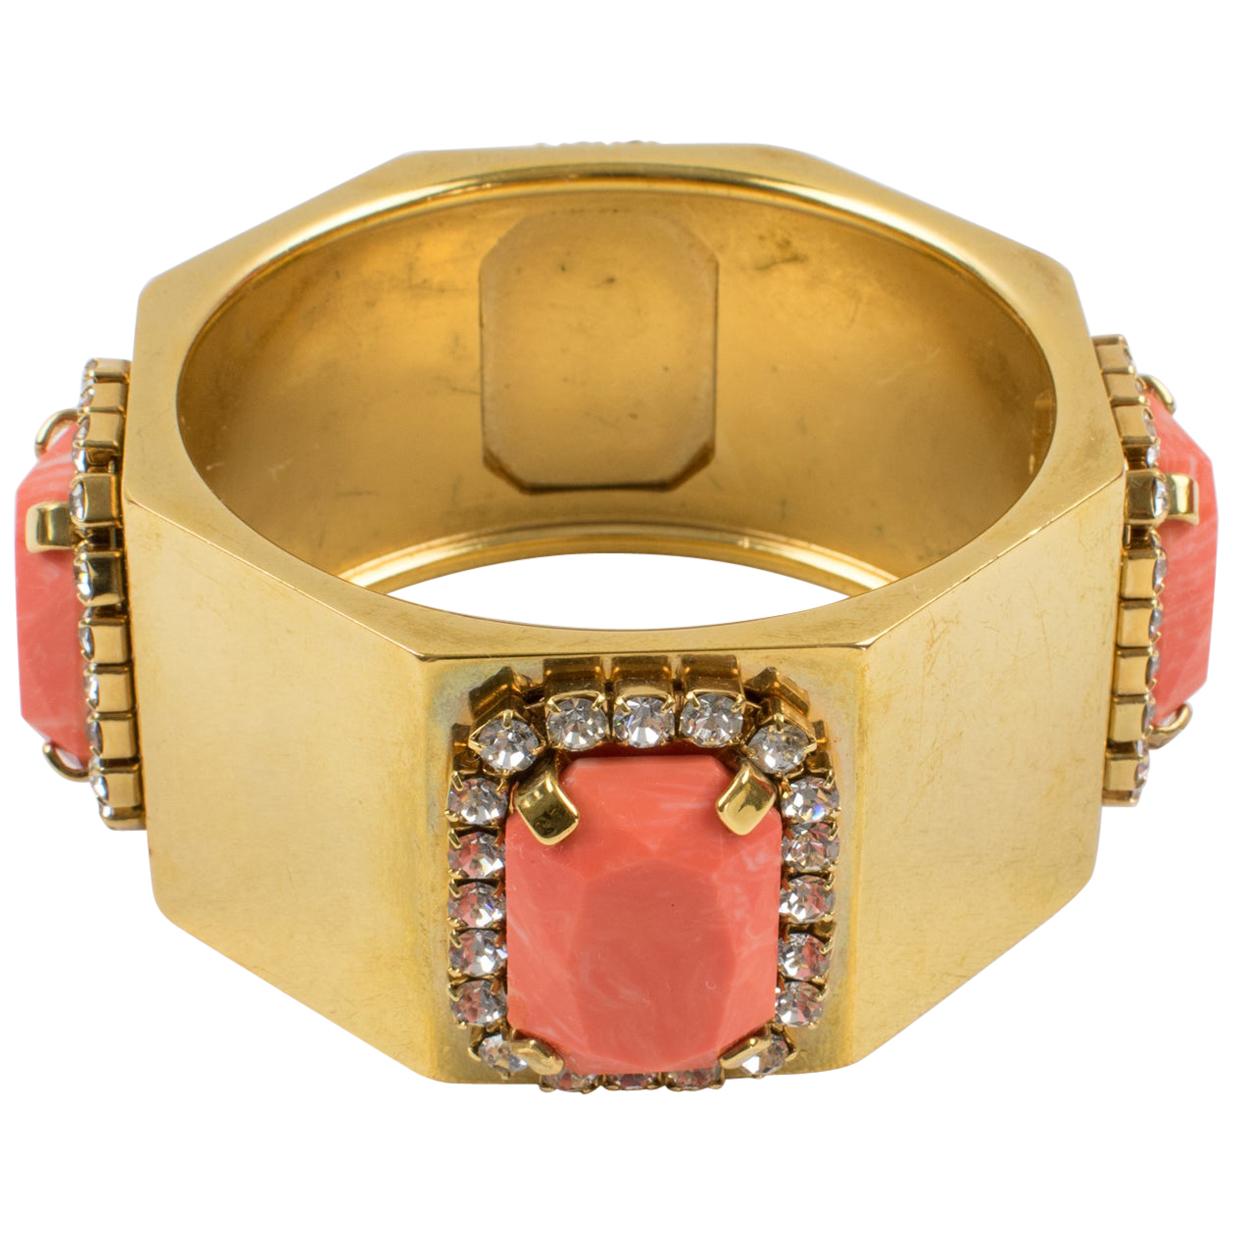 This stunning Valentino Garavani Haute Couture bracelet features a chunky faceted heavy gilded metal bangle shape ornate with tiny crystal rhinestones and large faux-coral resin cabochons (four designs all around). Valentino's hallmark is engraved